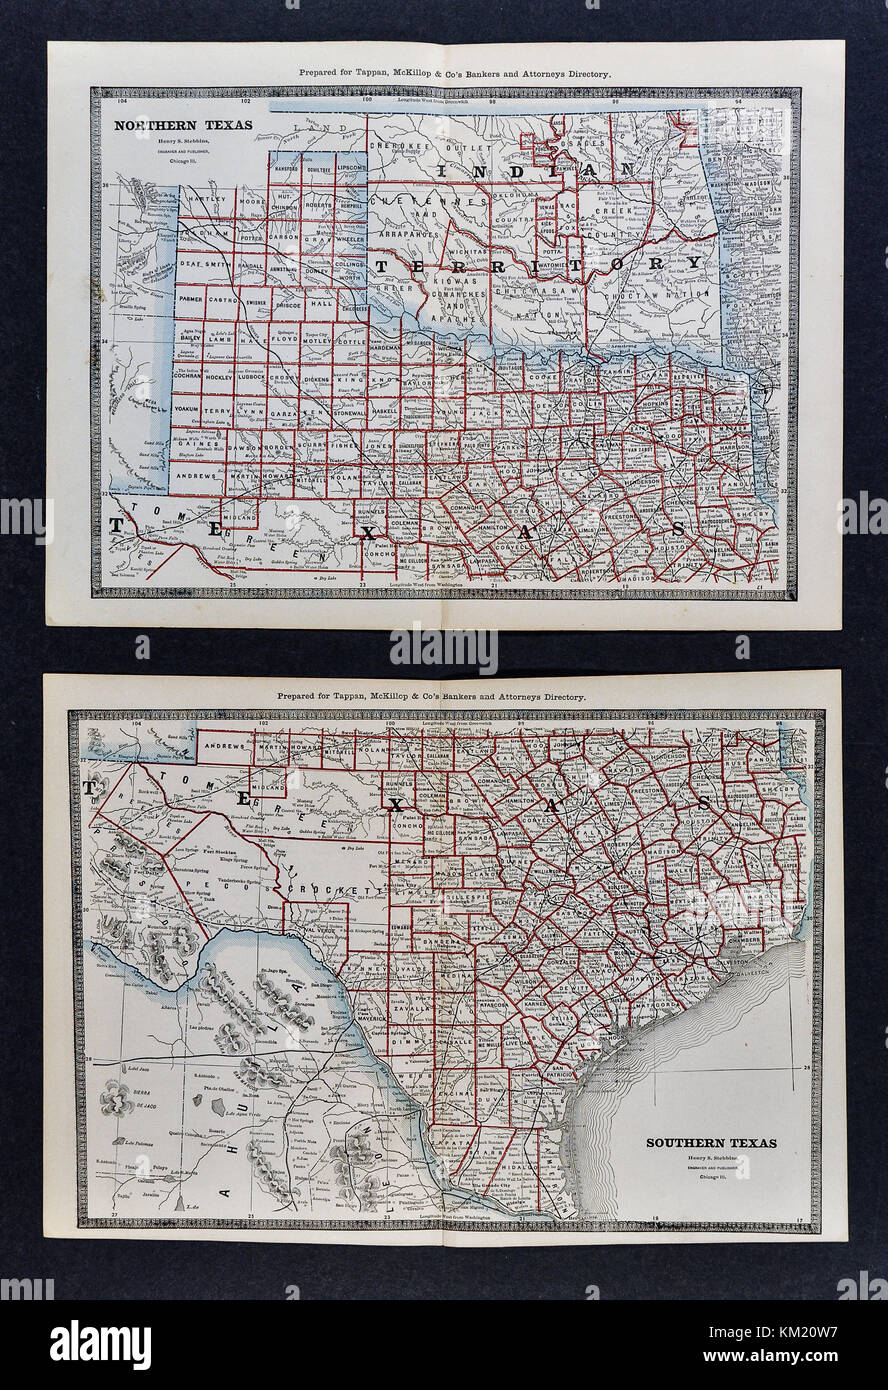 George Cram Antique Map from 1866 Atlas for Attorneys and Bankers: United States - Texas - Austin San Antonio Houston Dallas Fort Worth Galveston Stock Photo